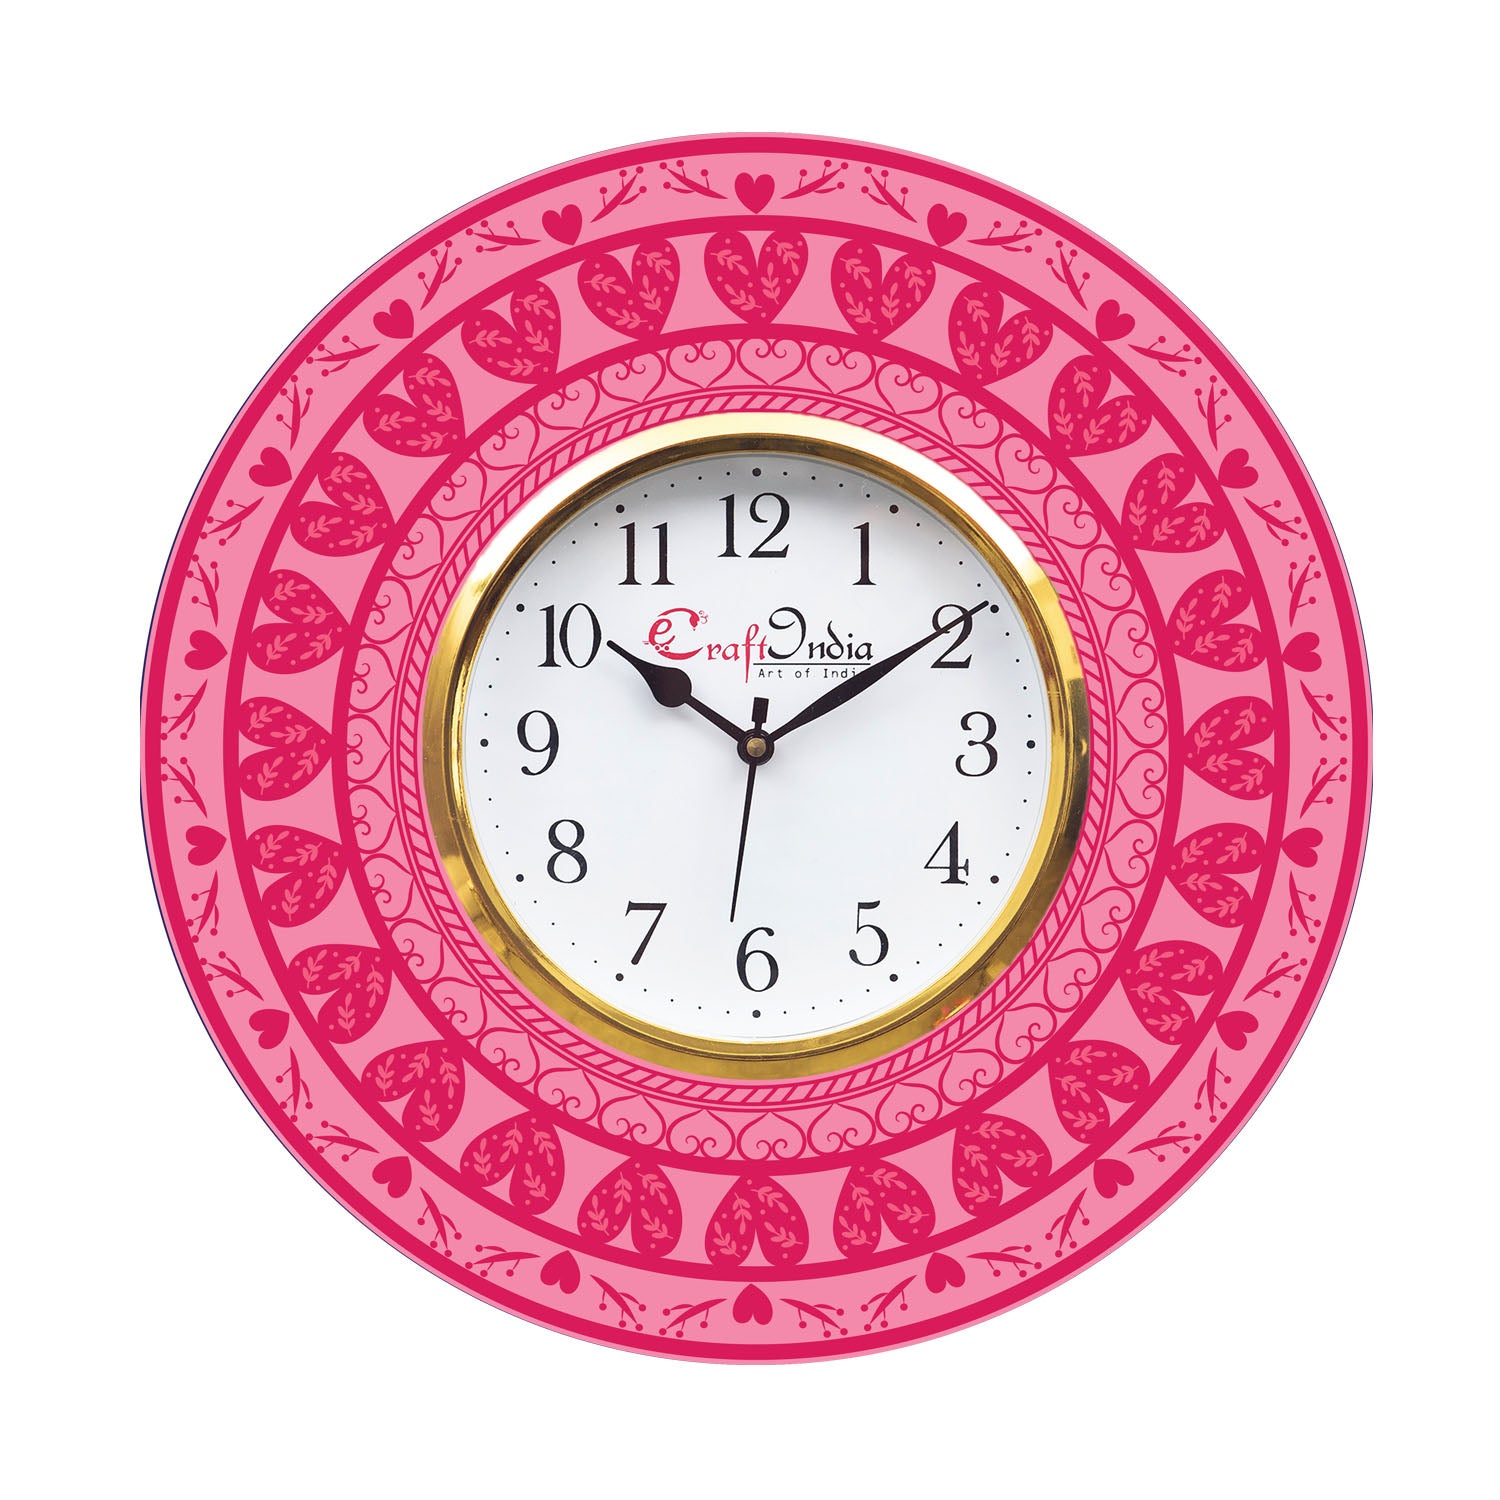 Valentine Love Heart Theme Wooden Colorful Round Wall Clock